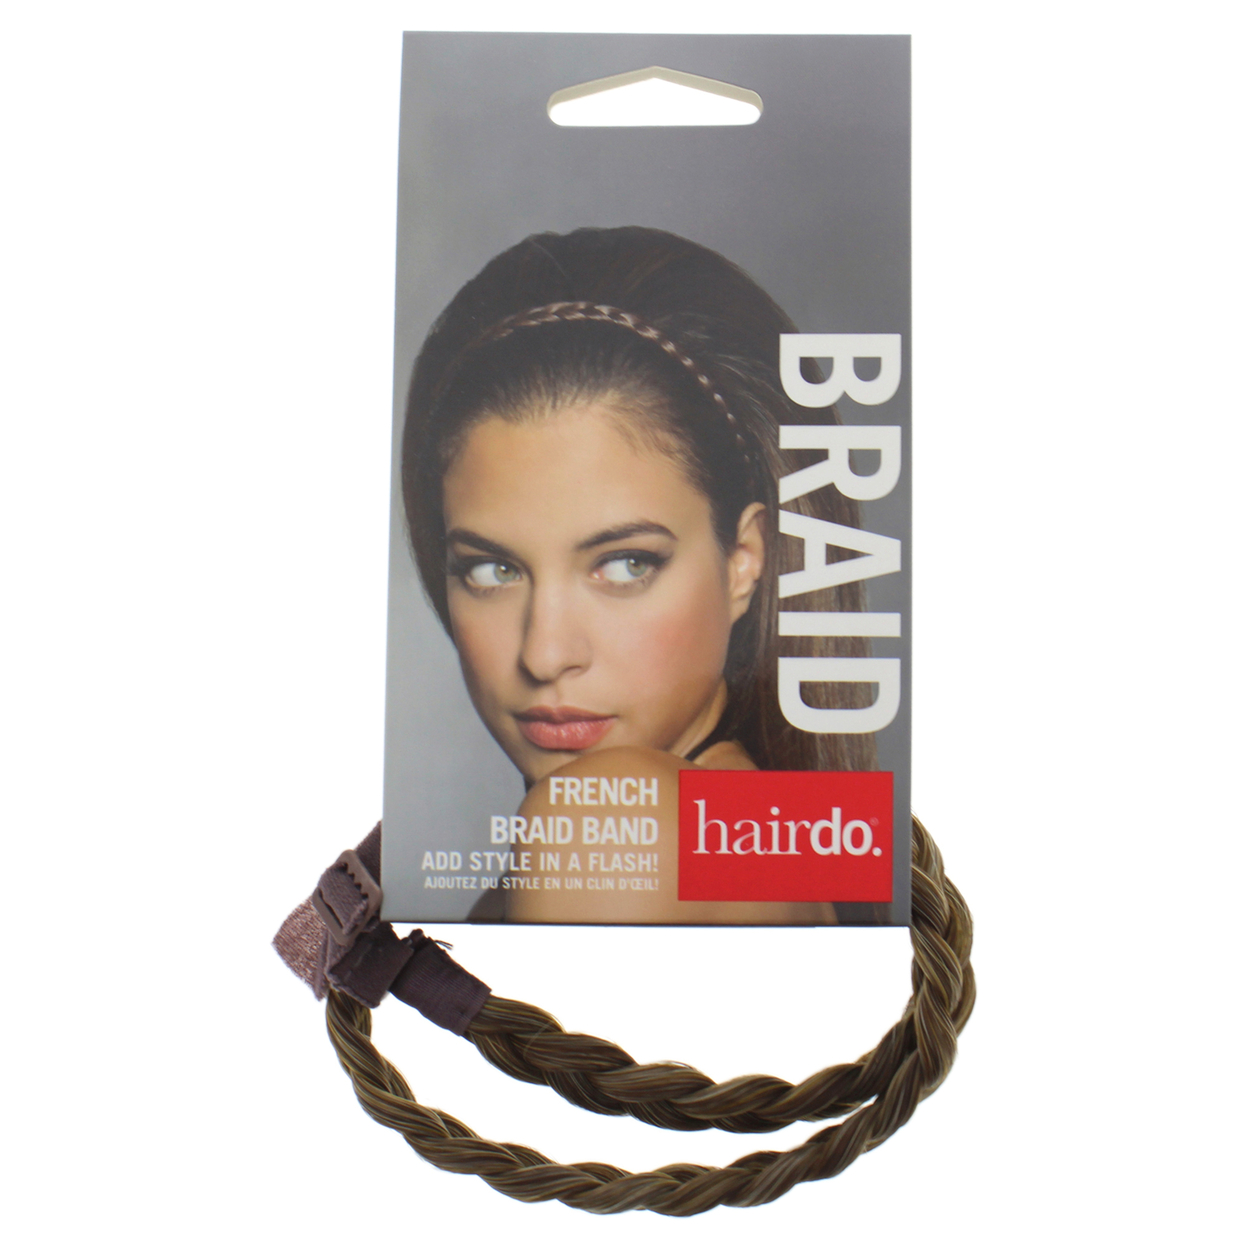 Hairdo French Braid Band - R1416T Buttered Toast Hair Band 1 Pc